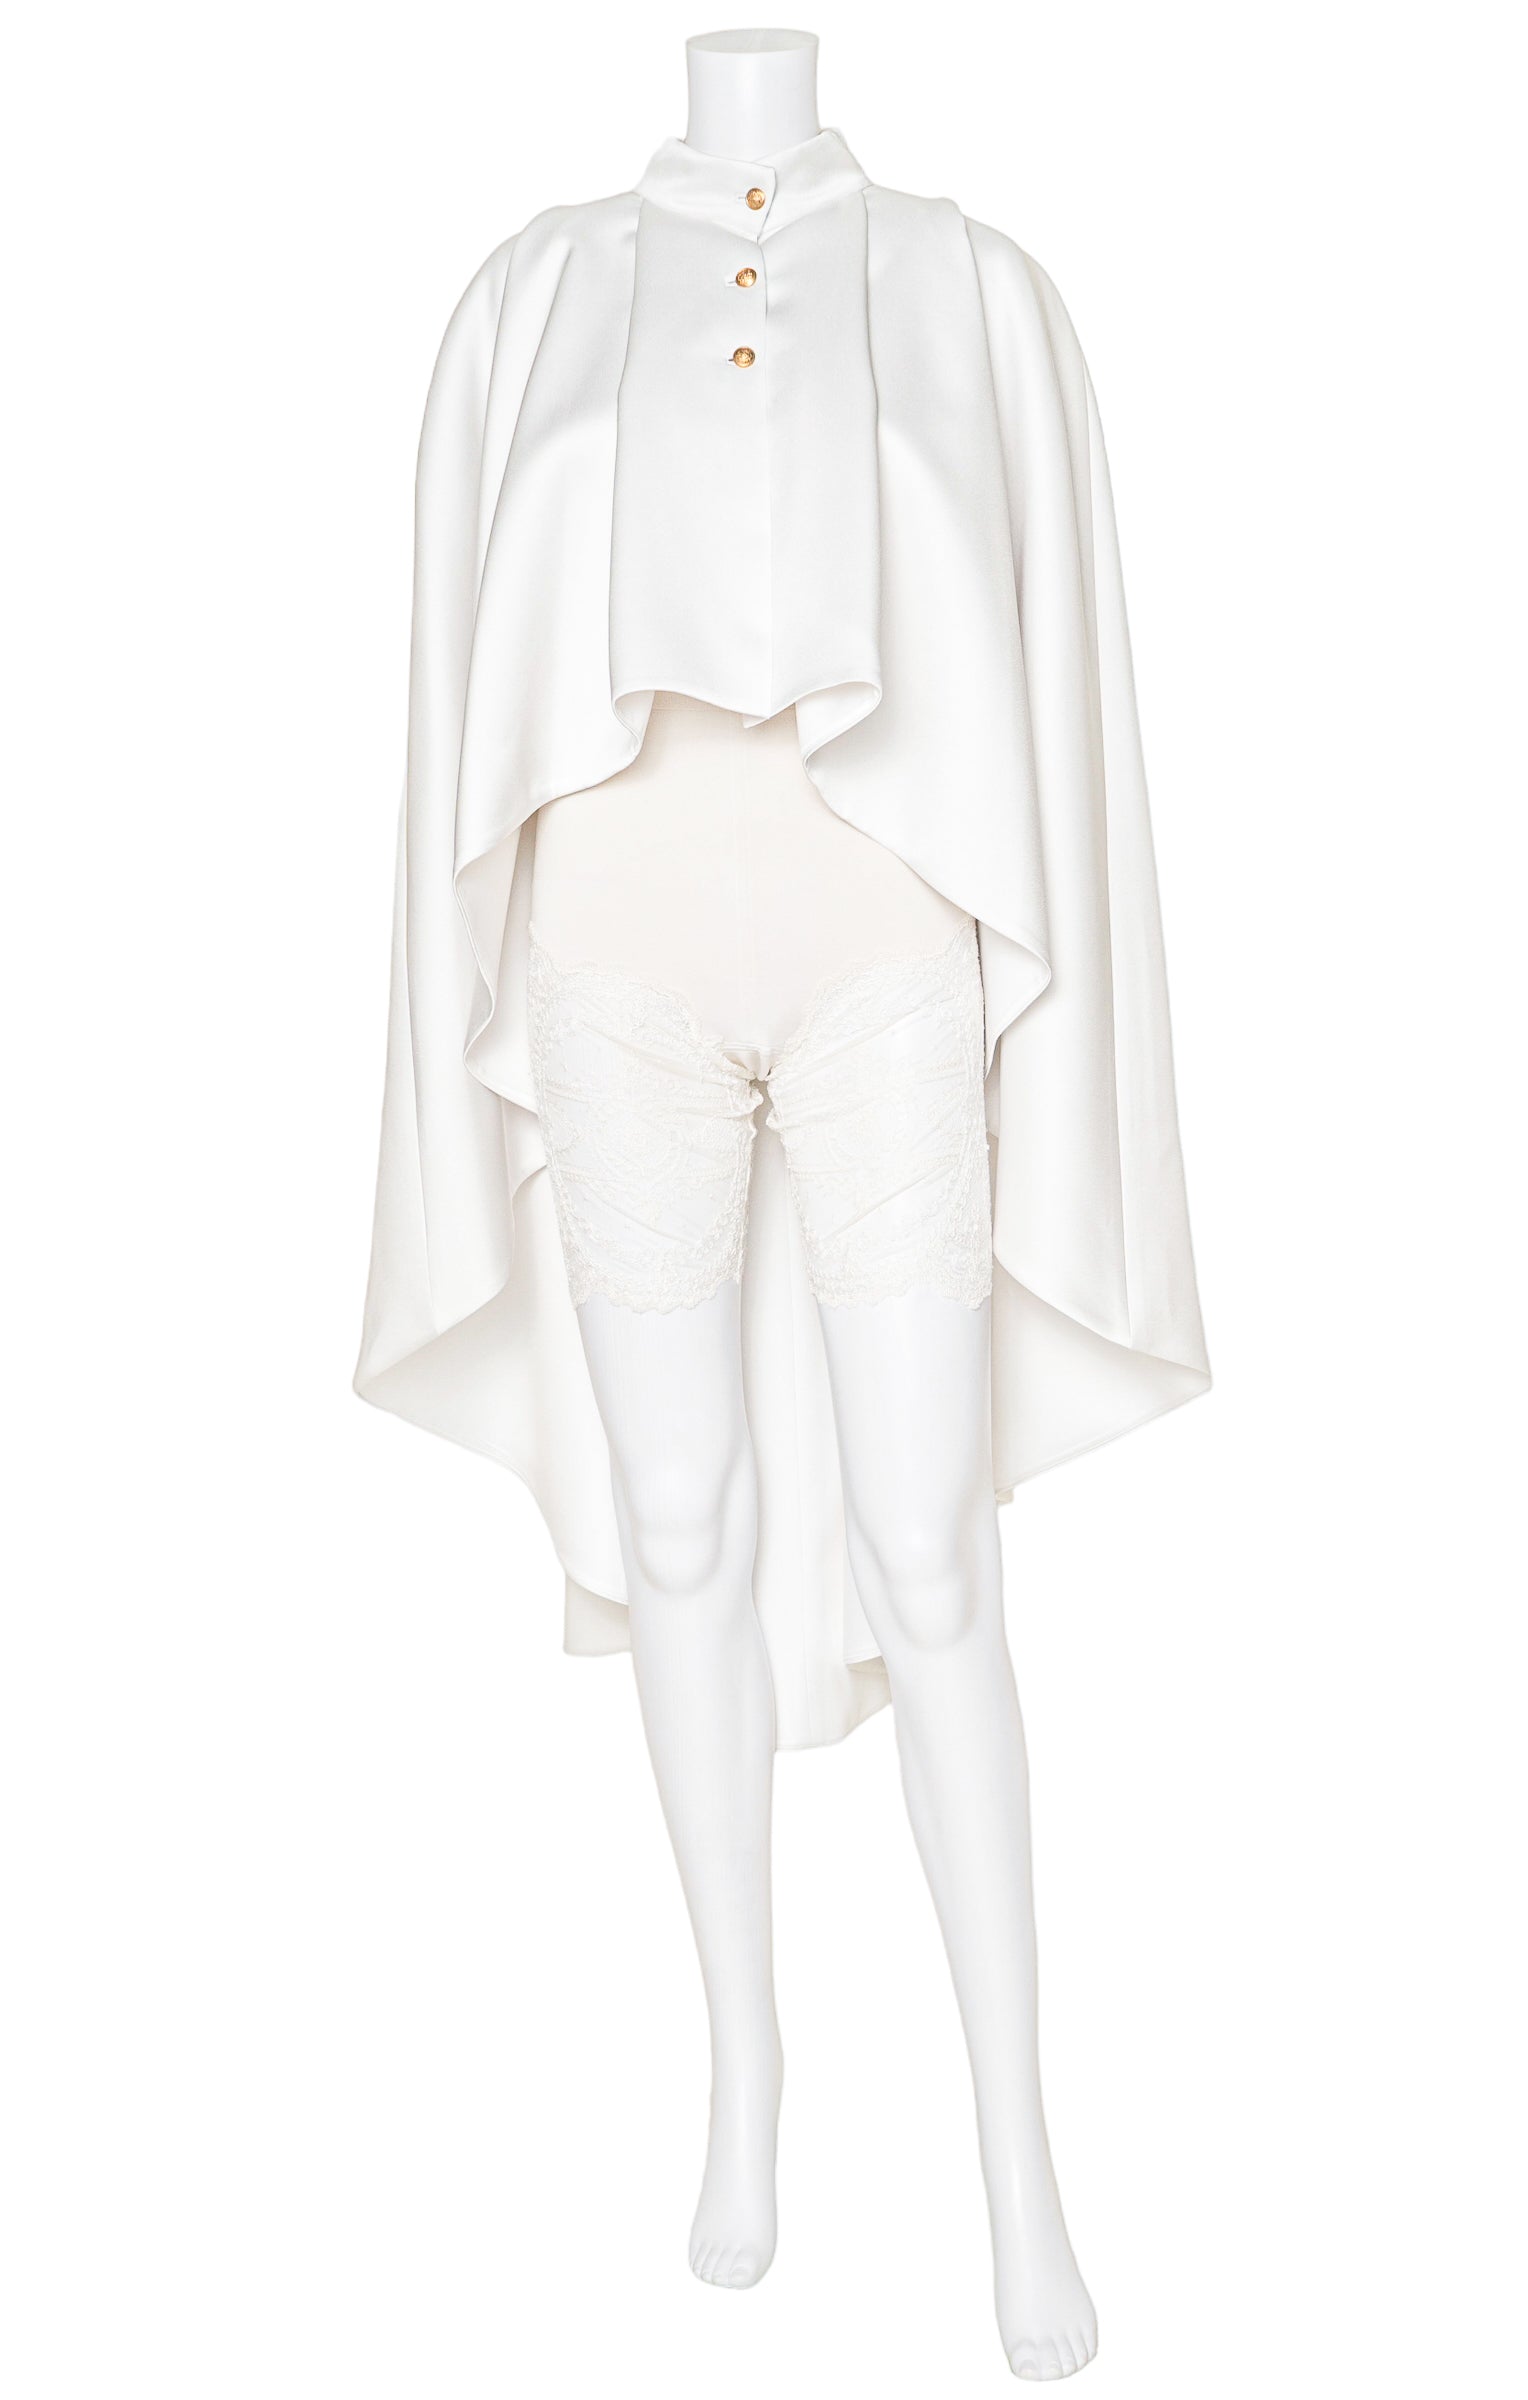 ALICE + OLIVIA (NEW) with tags Jacket / Cape Size: M/L